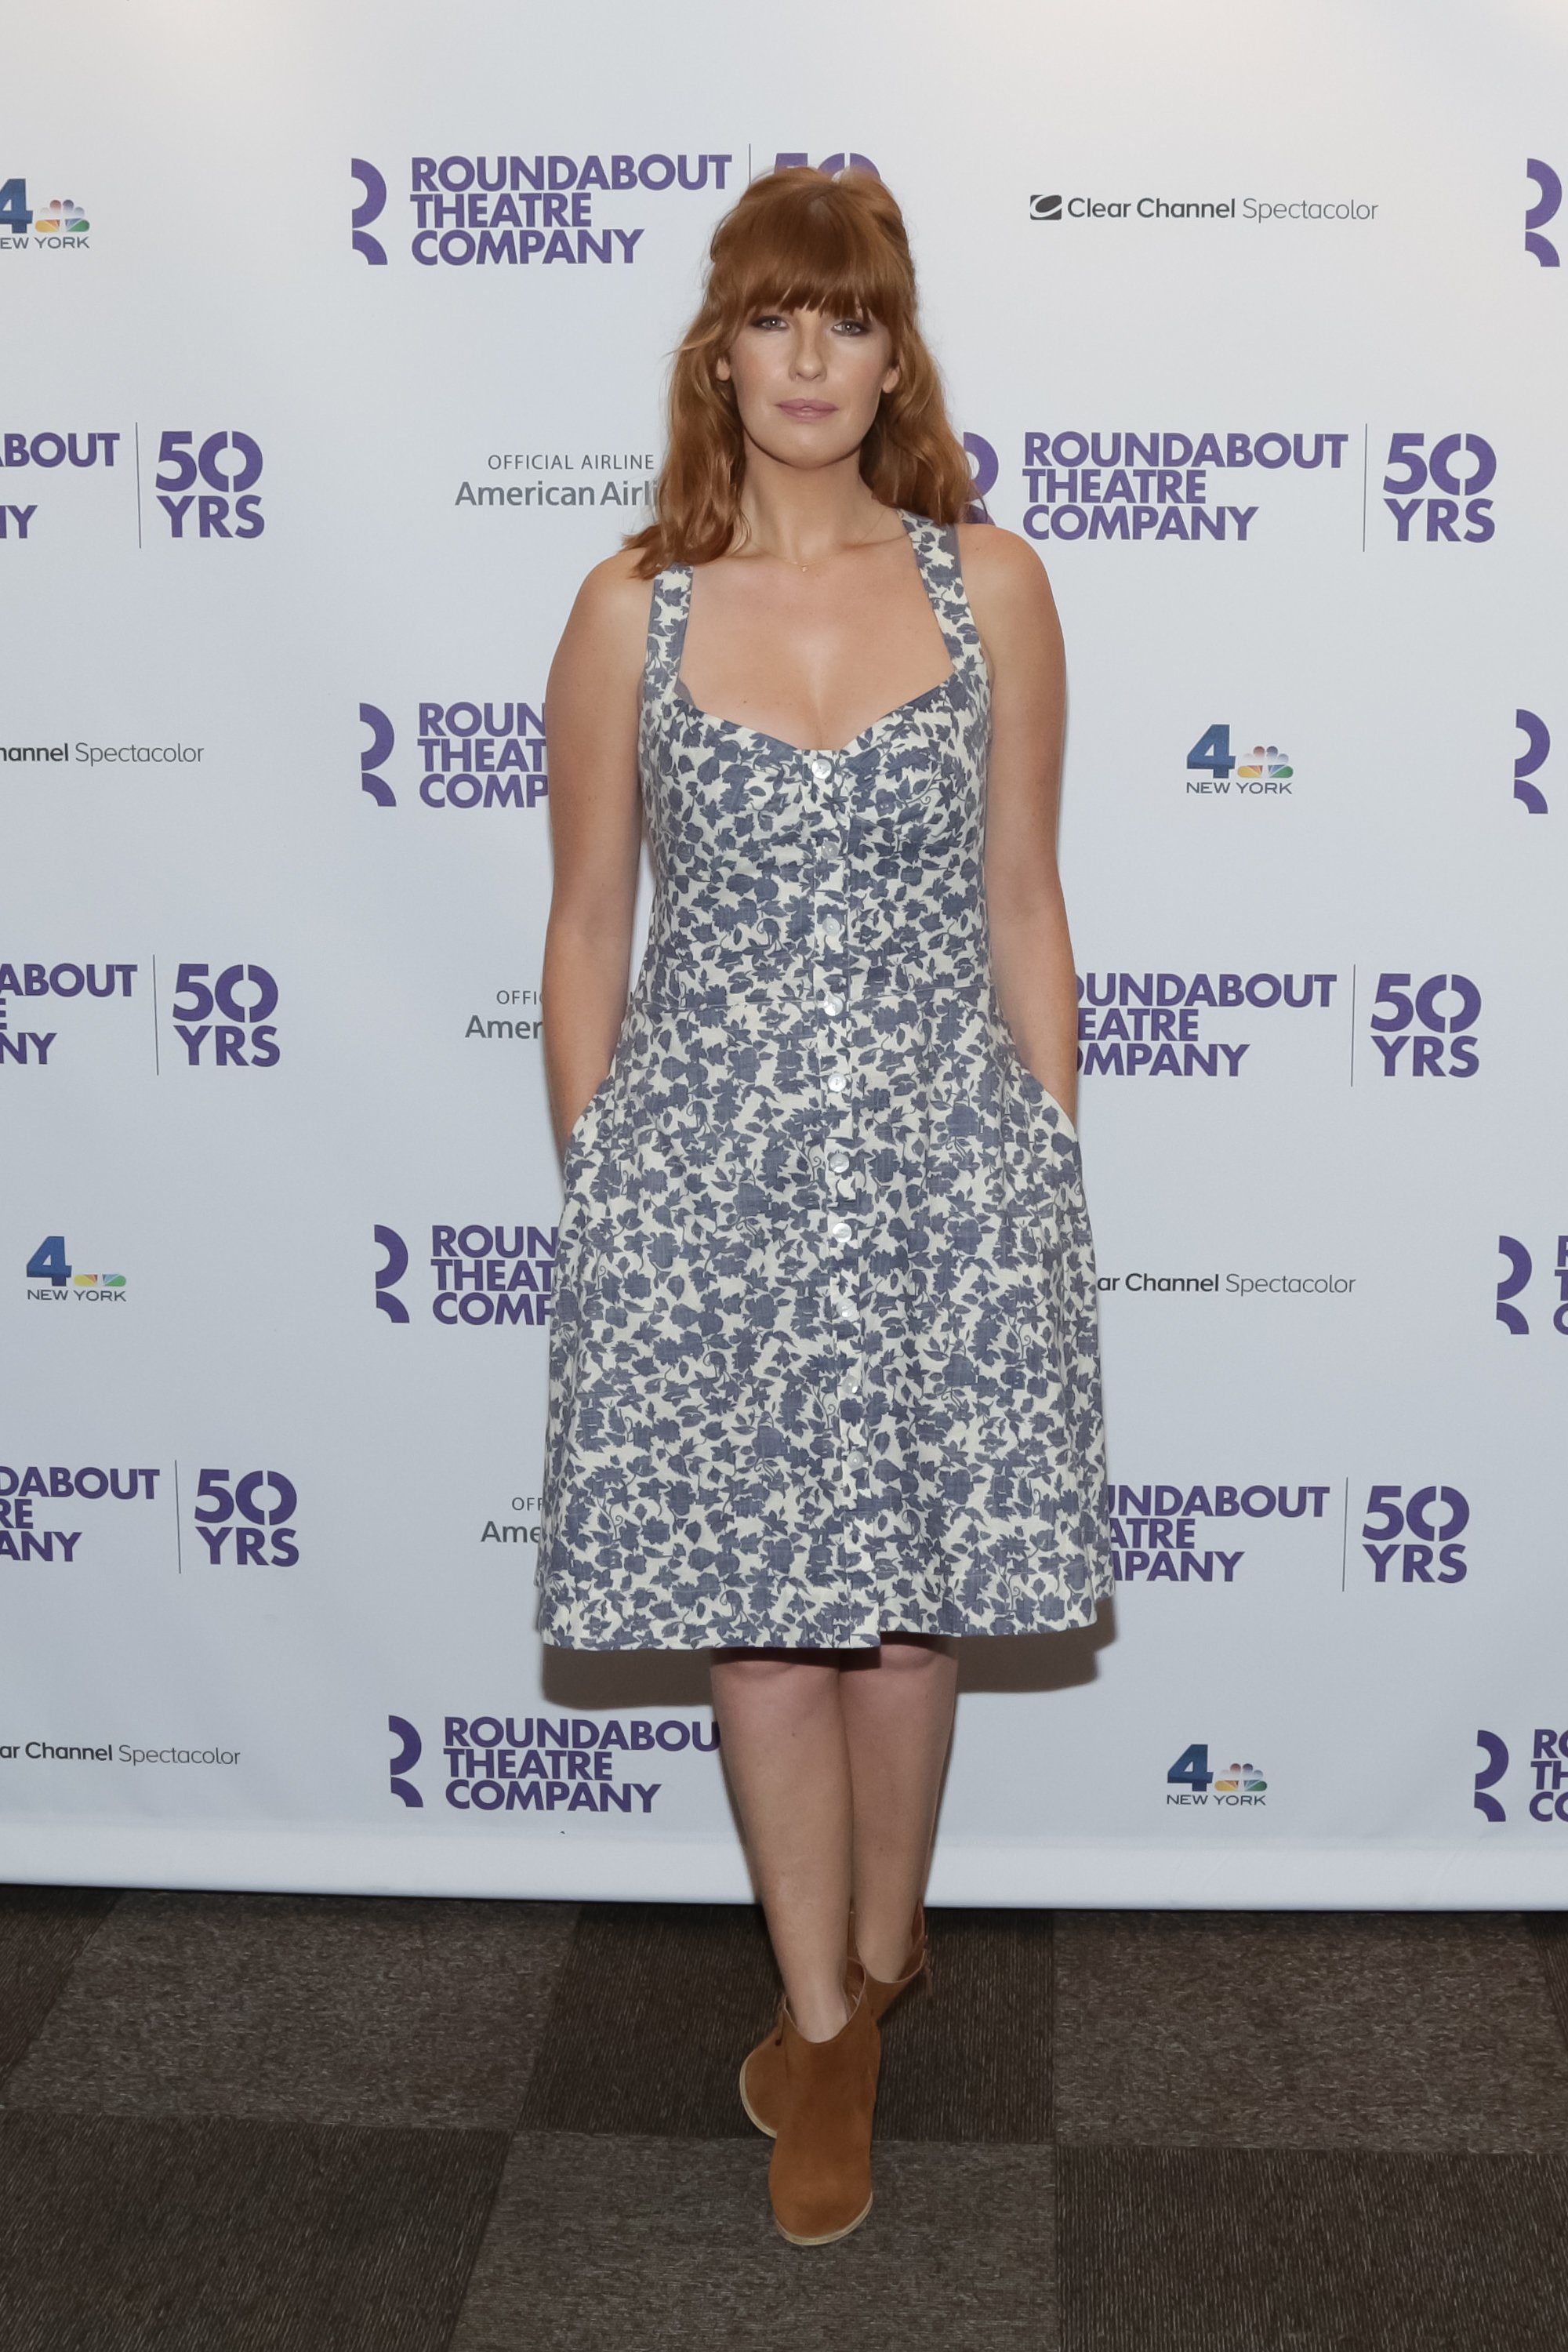 Kelly Reilly at the Roundabout Theatre Company on September 10, 2015, in New York City. | Source: Getty Images